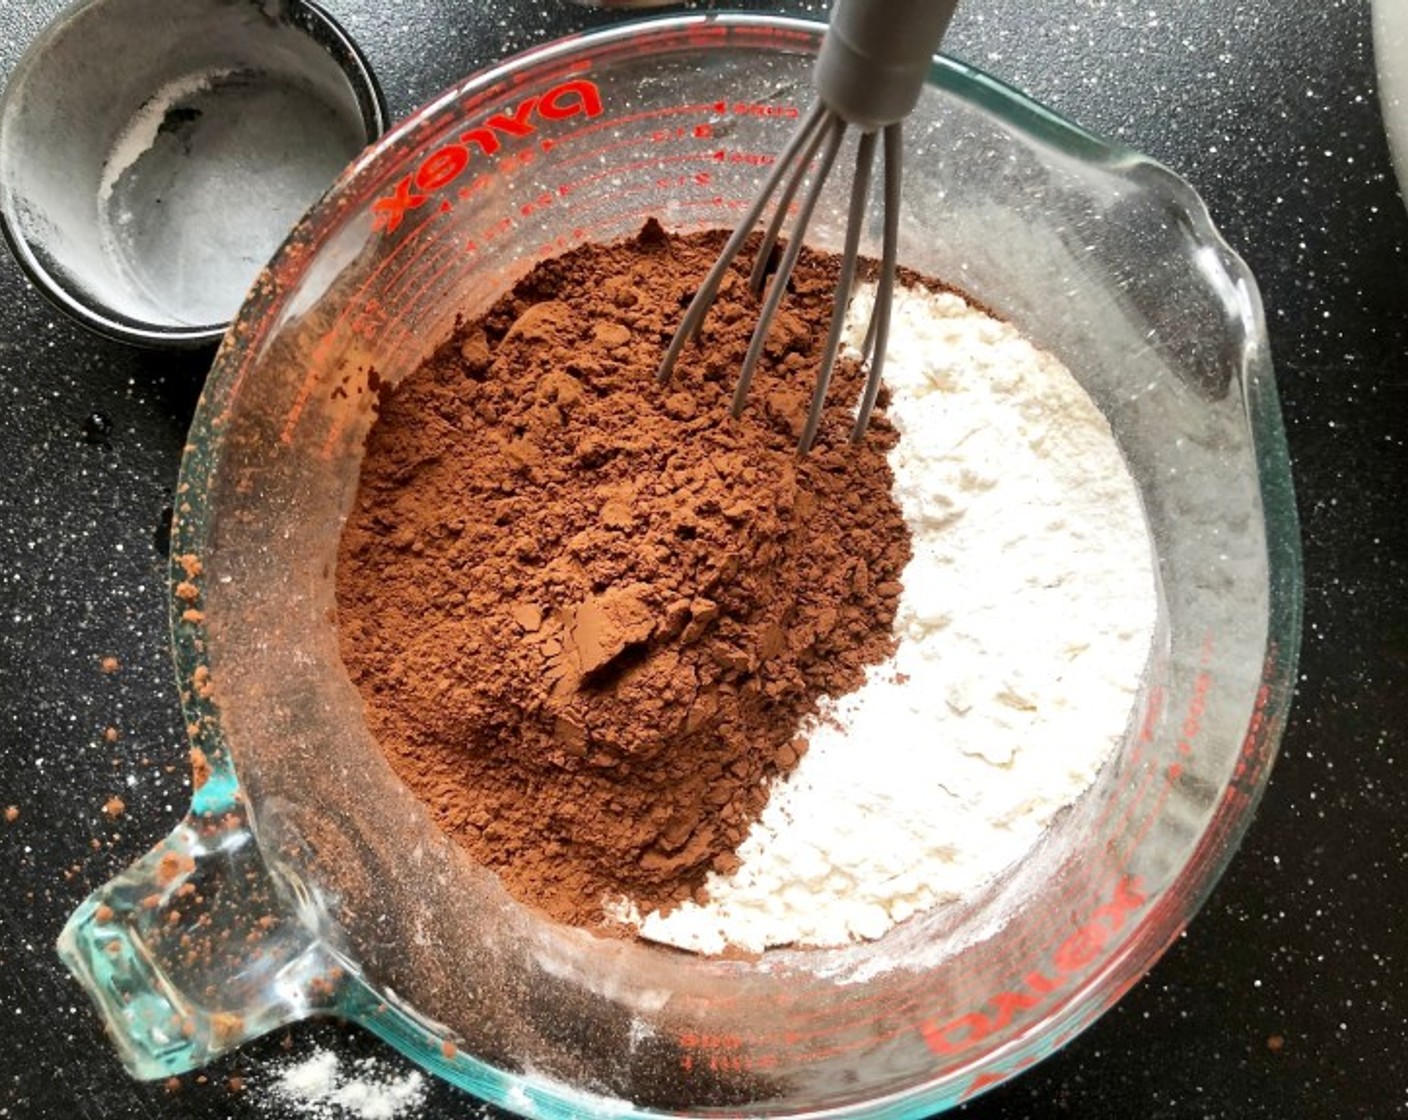 step 4 Meanwhile, add the All-Purpose Flour (1 1/2 cups), Baking Powder (1/2 Tbsp), and Salt (1/4 tsp) to a medium bowl. Add Unsweetened Cocoa Powder (3/4 cup) and whisk until well incorporated.